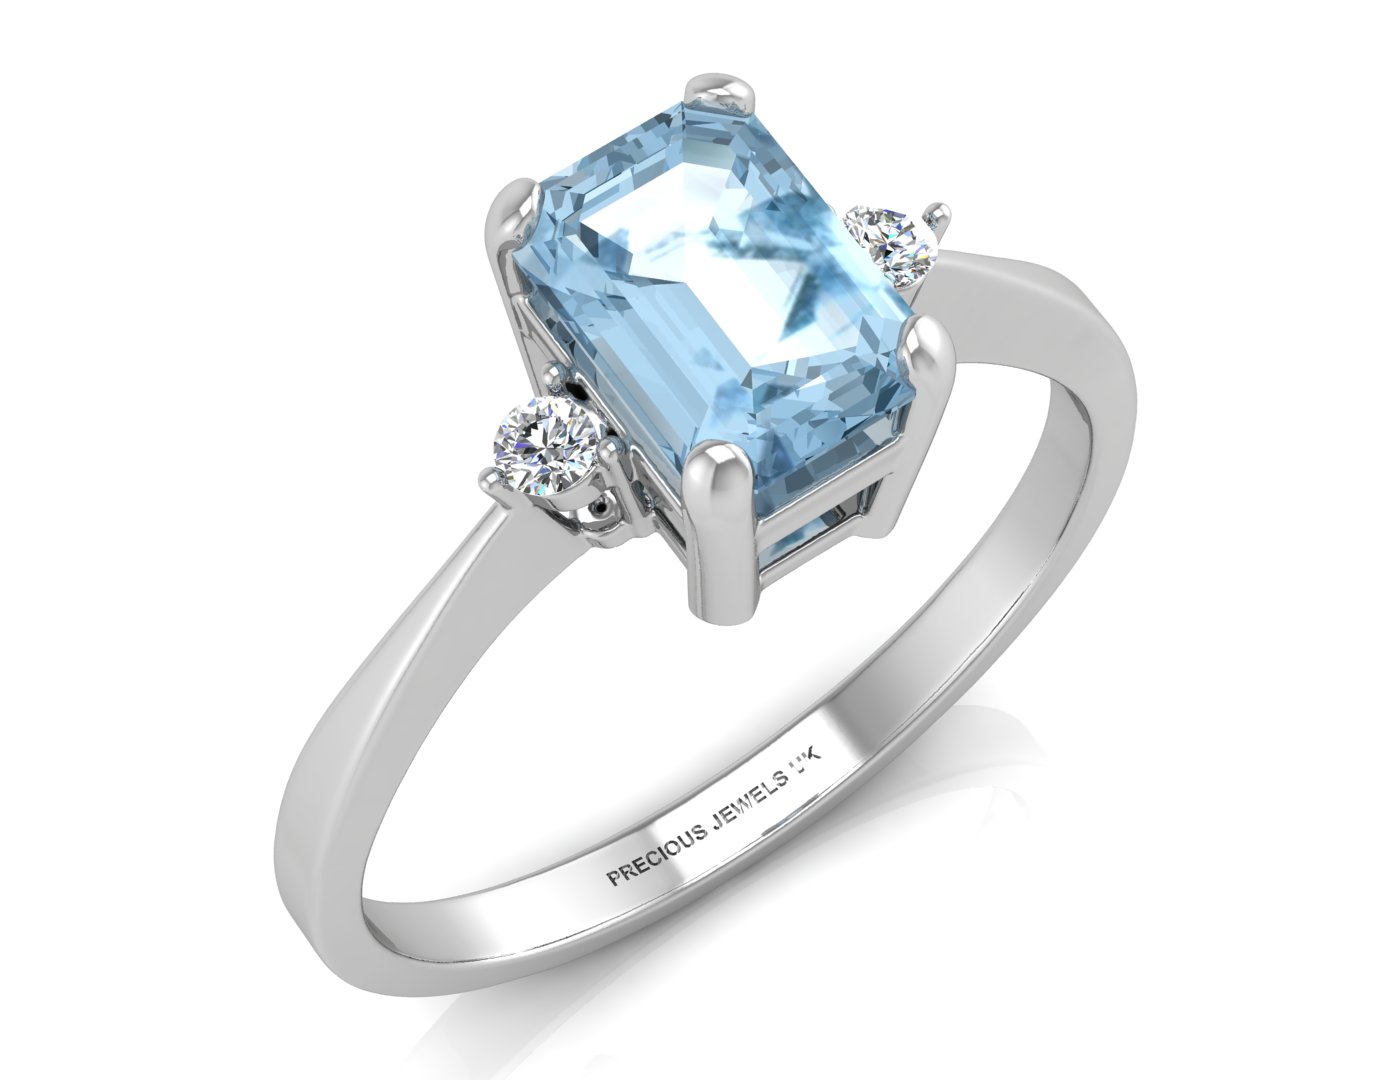 9ct White Gold Diamond and Emerald Cut Blue Topaz Ring (BT1.21) 0.04 Carats - Image 3 of 5